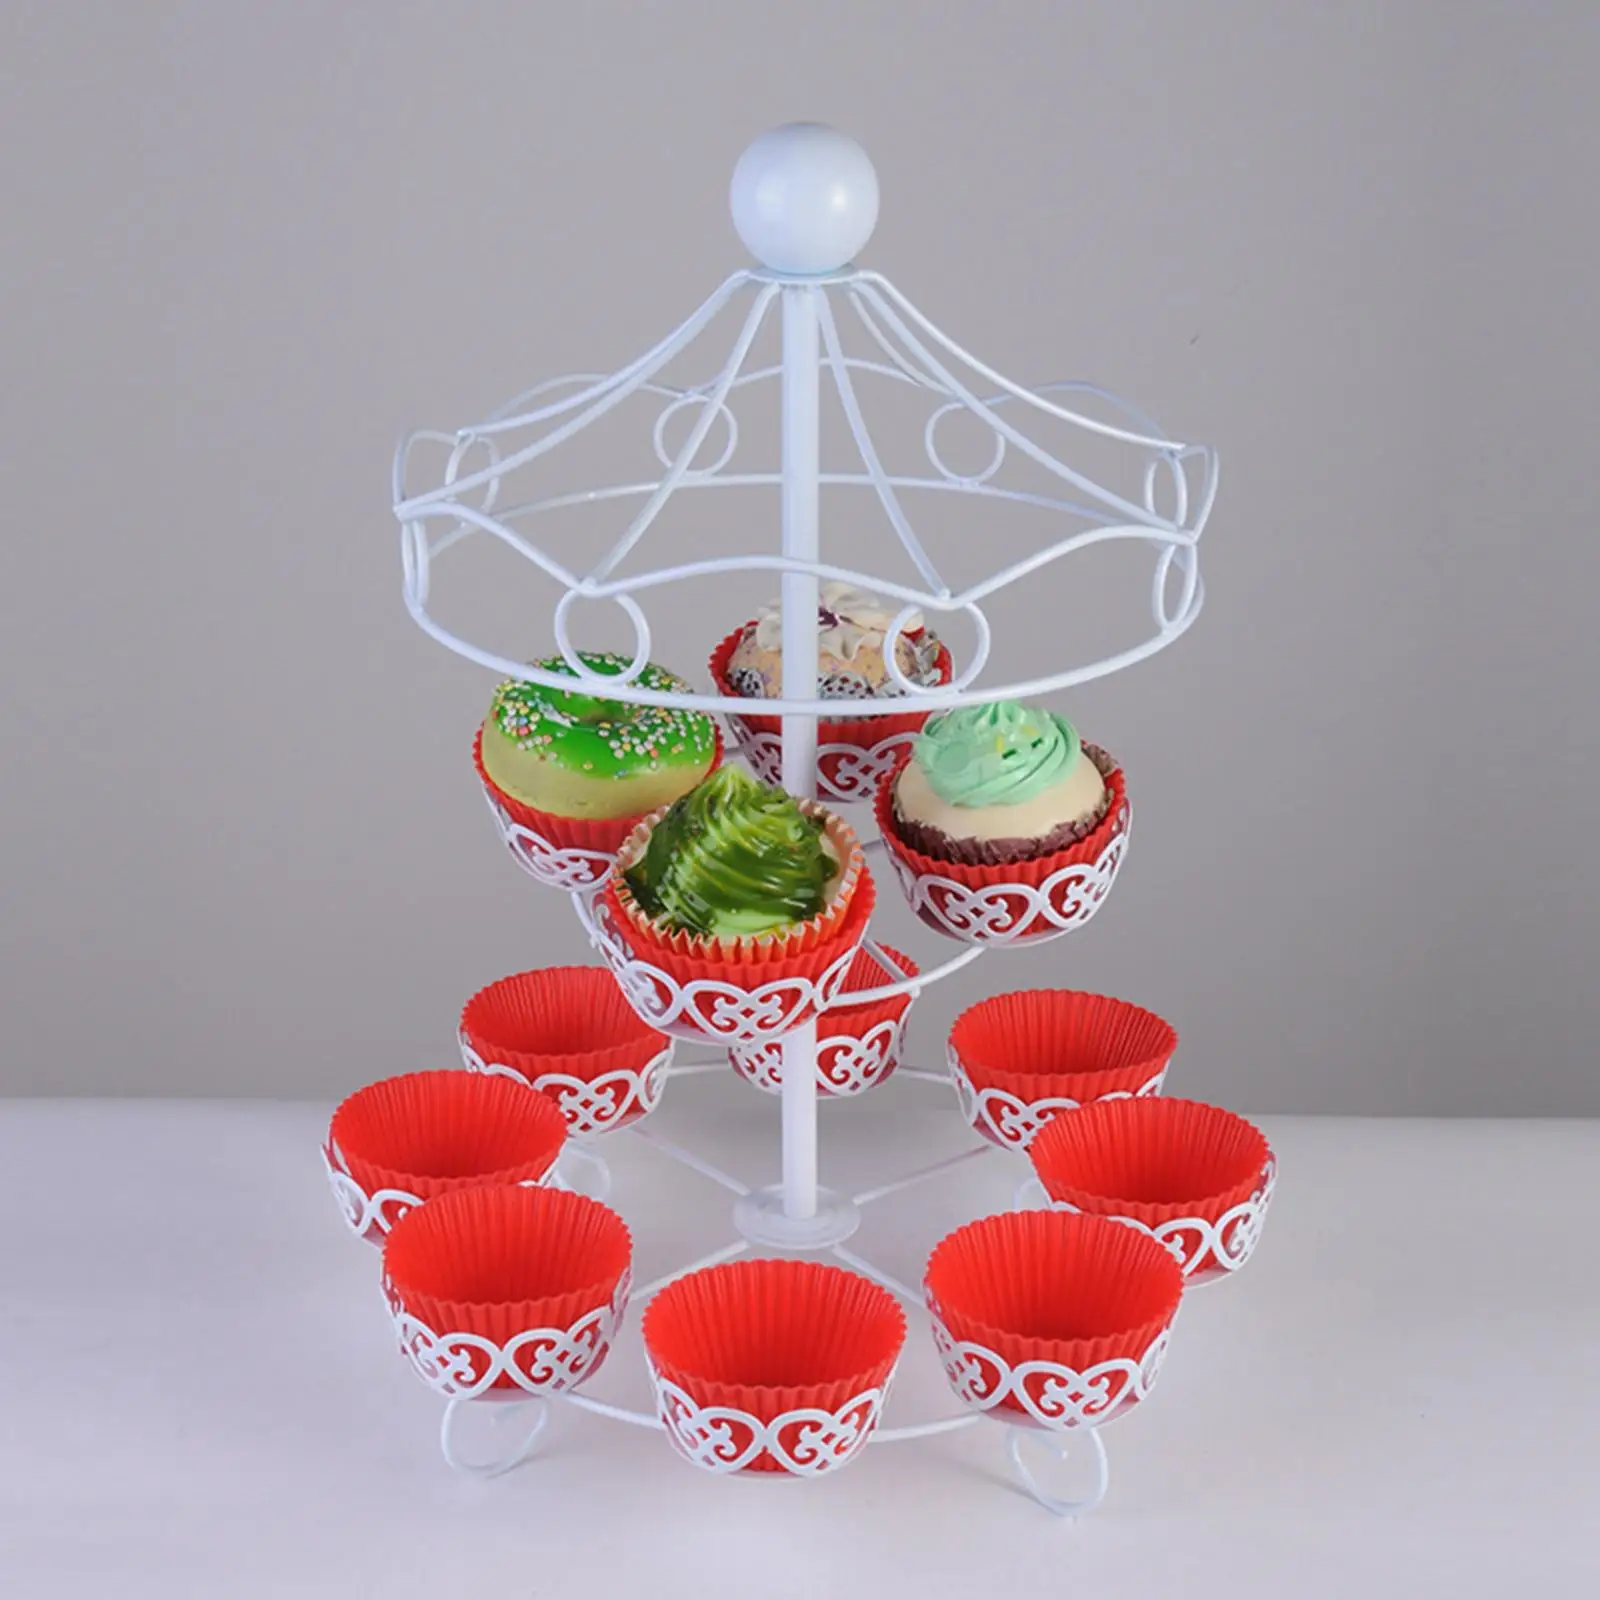 Multipurpose Cupcake Holder Display Stand Cake Holder Cake Display Server Tray for Wedding Anniversary Events Dining Table Decor